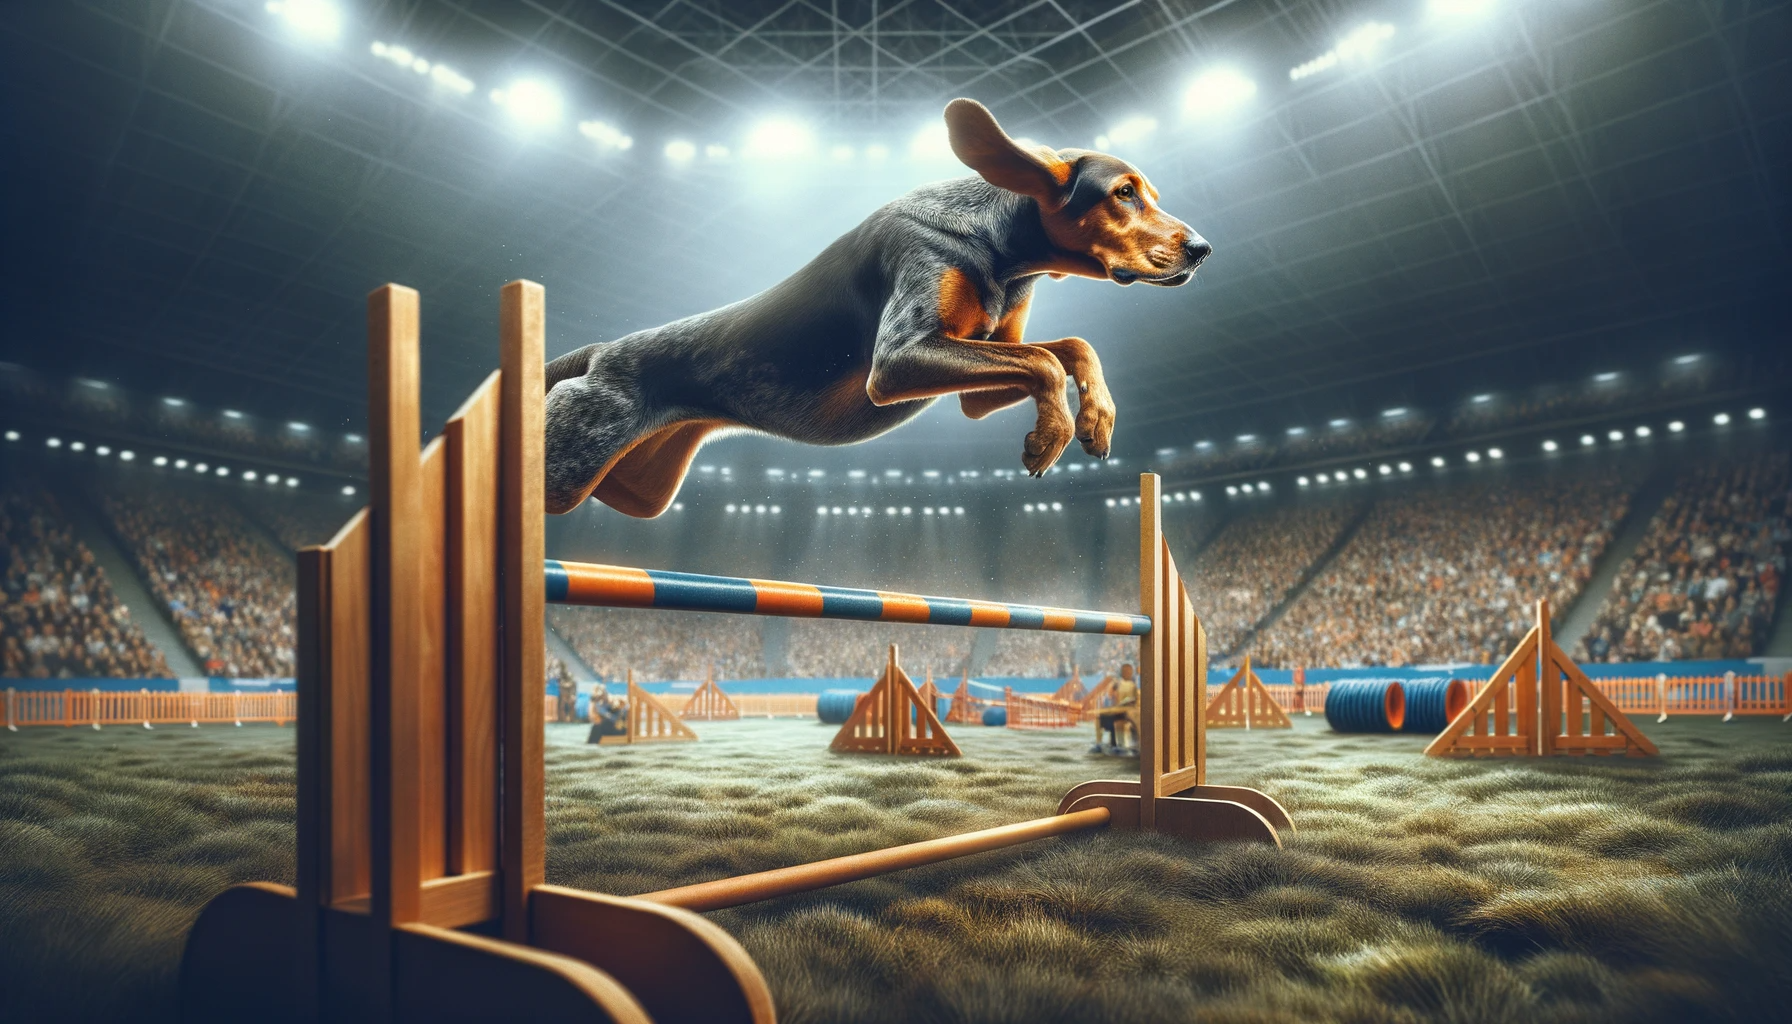 A Coonhound Lab Mix Clearing a High Hurdle with Agility and Grace, Showcasing Its Unique Athletic Abilities